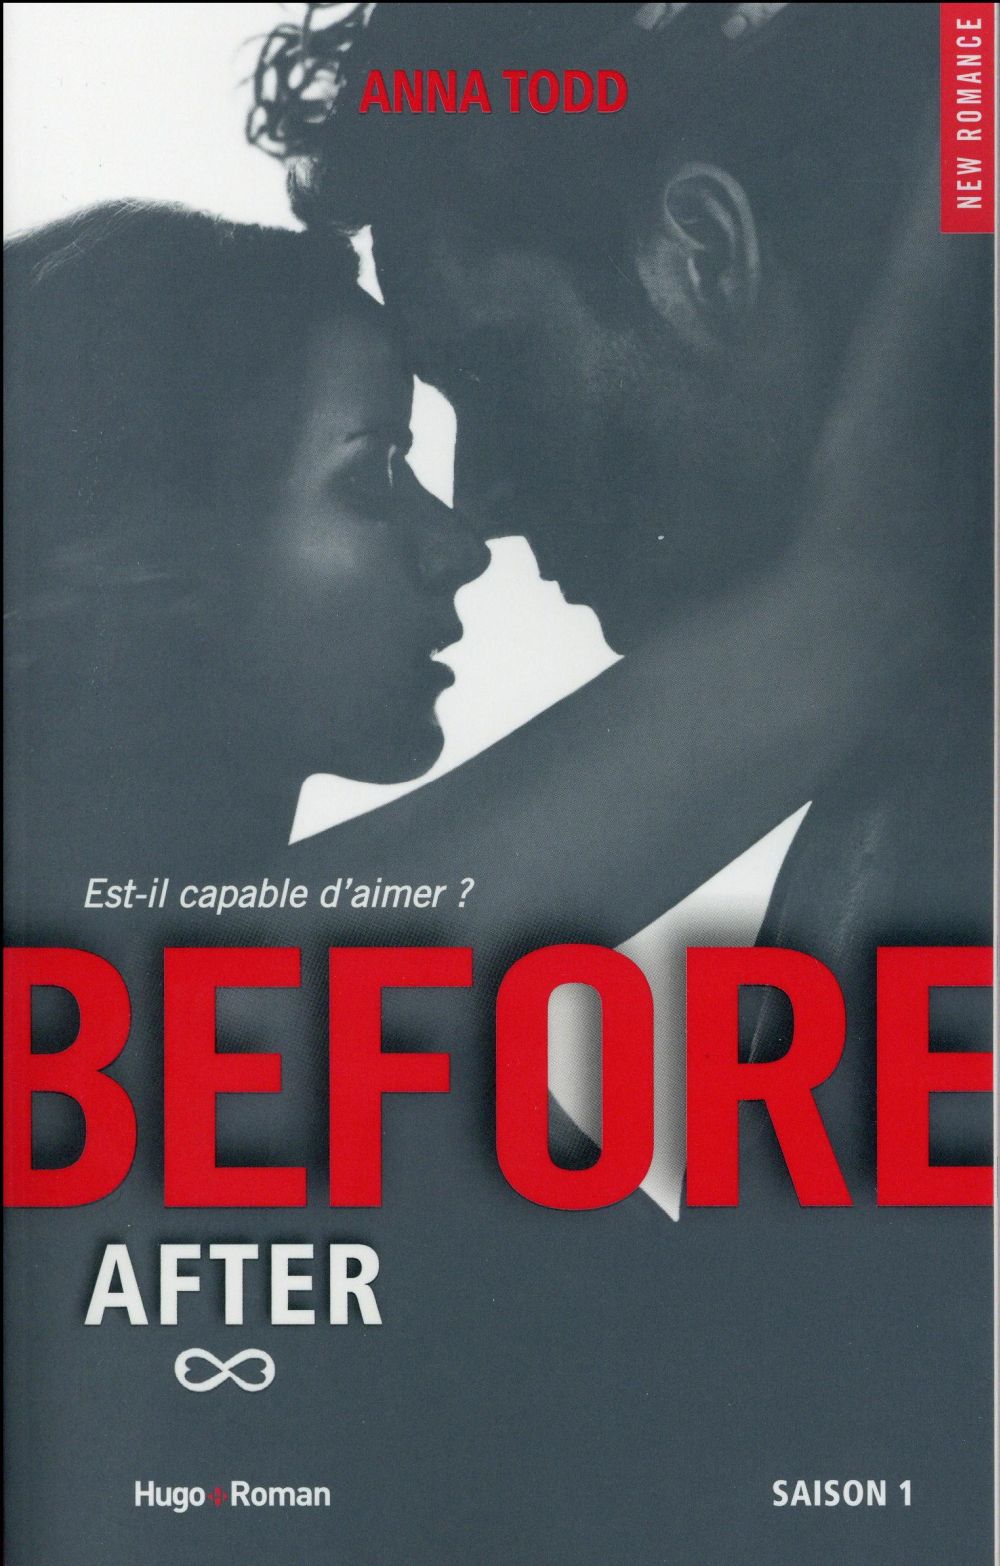 AFTER - BEFORE SAISON 1